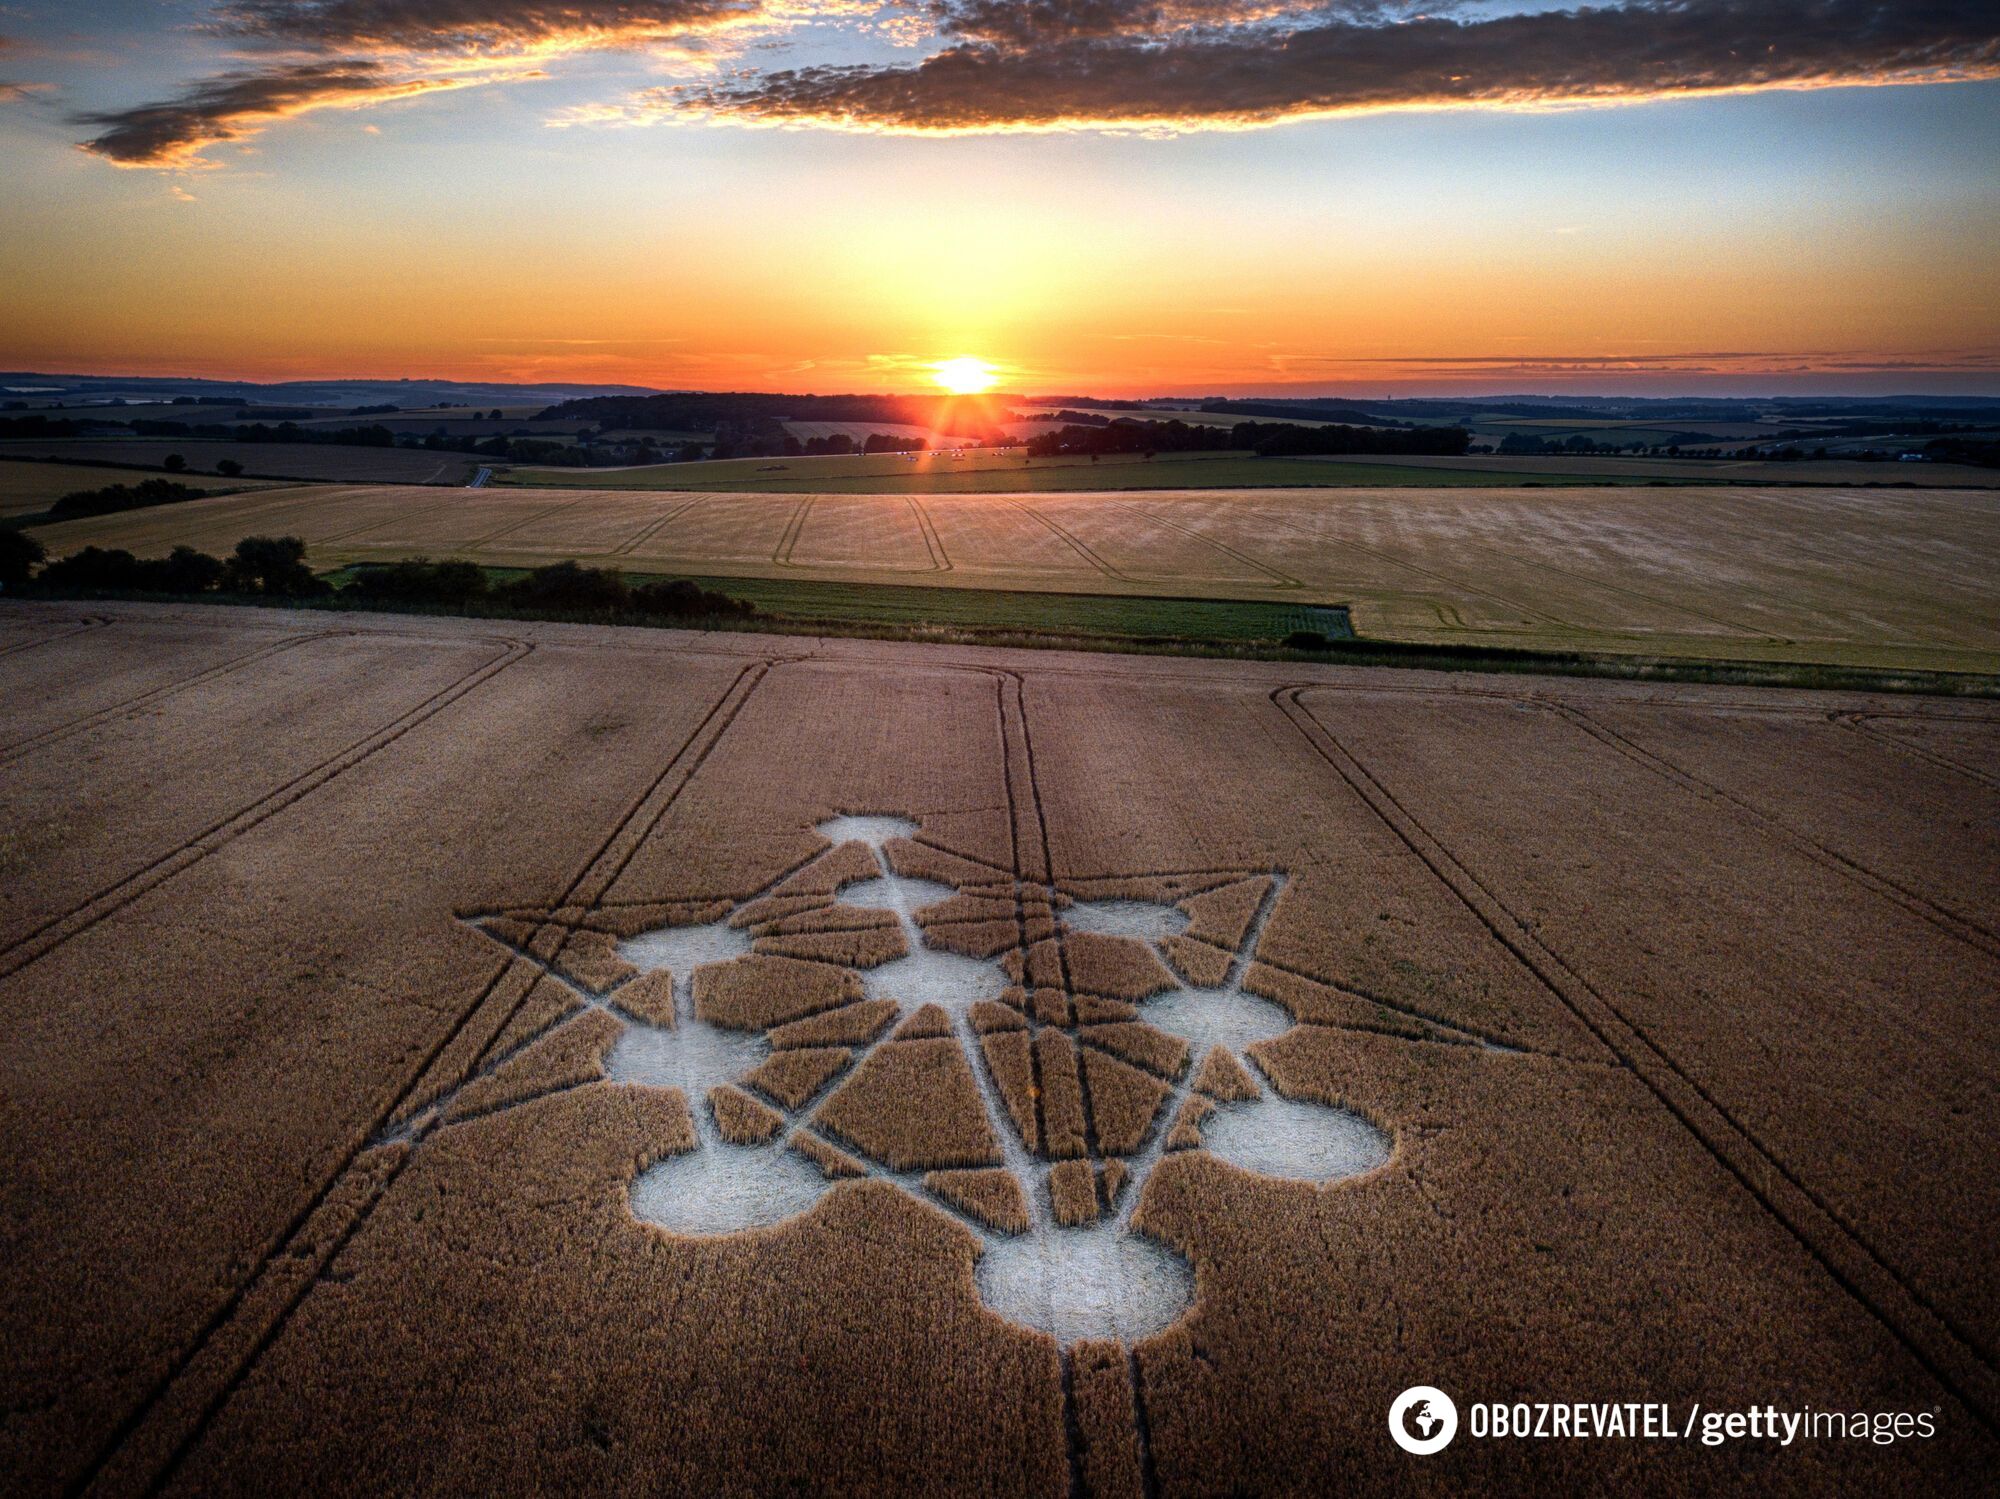 Crop circles in Dorset (England) on July 5, 2019.